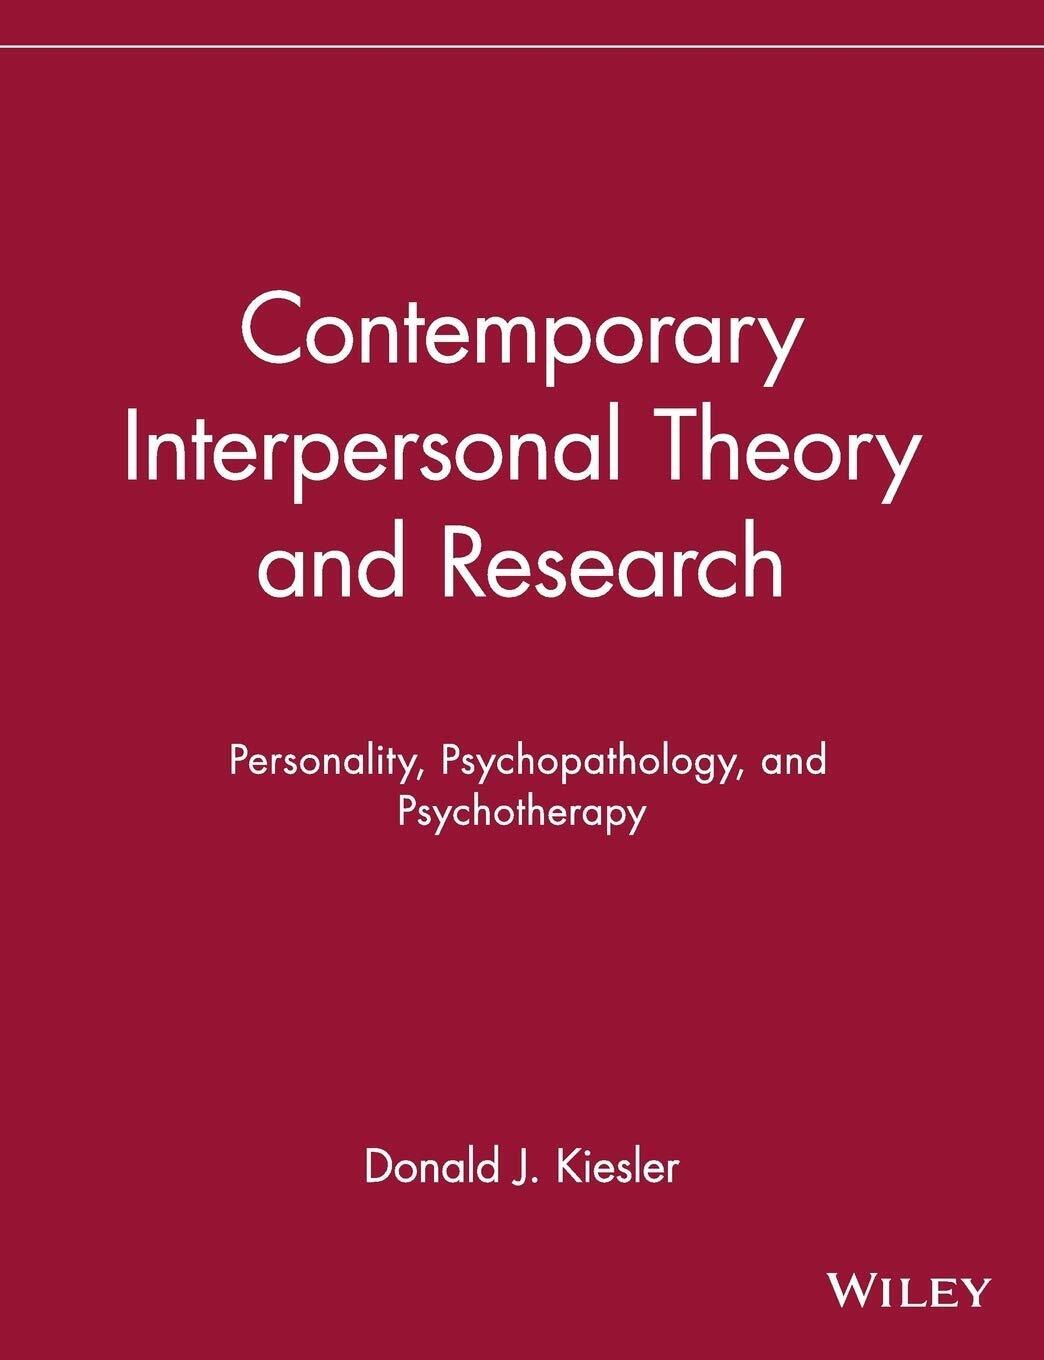 Contemporary Interpersonal Theory and Research - Donald J. Kiesler, Kiesler-1996